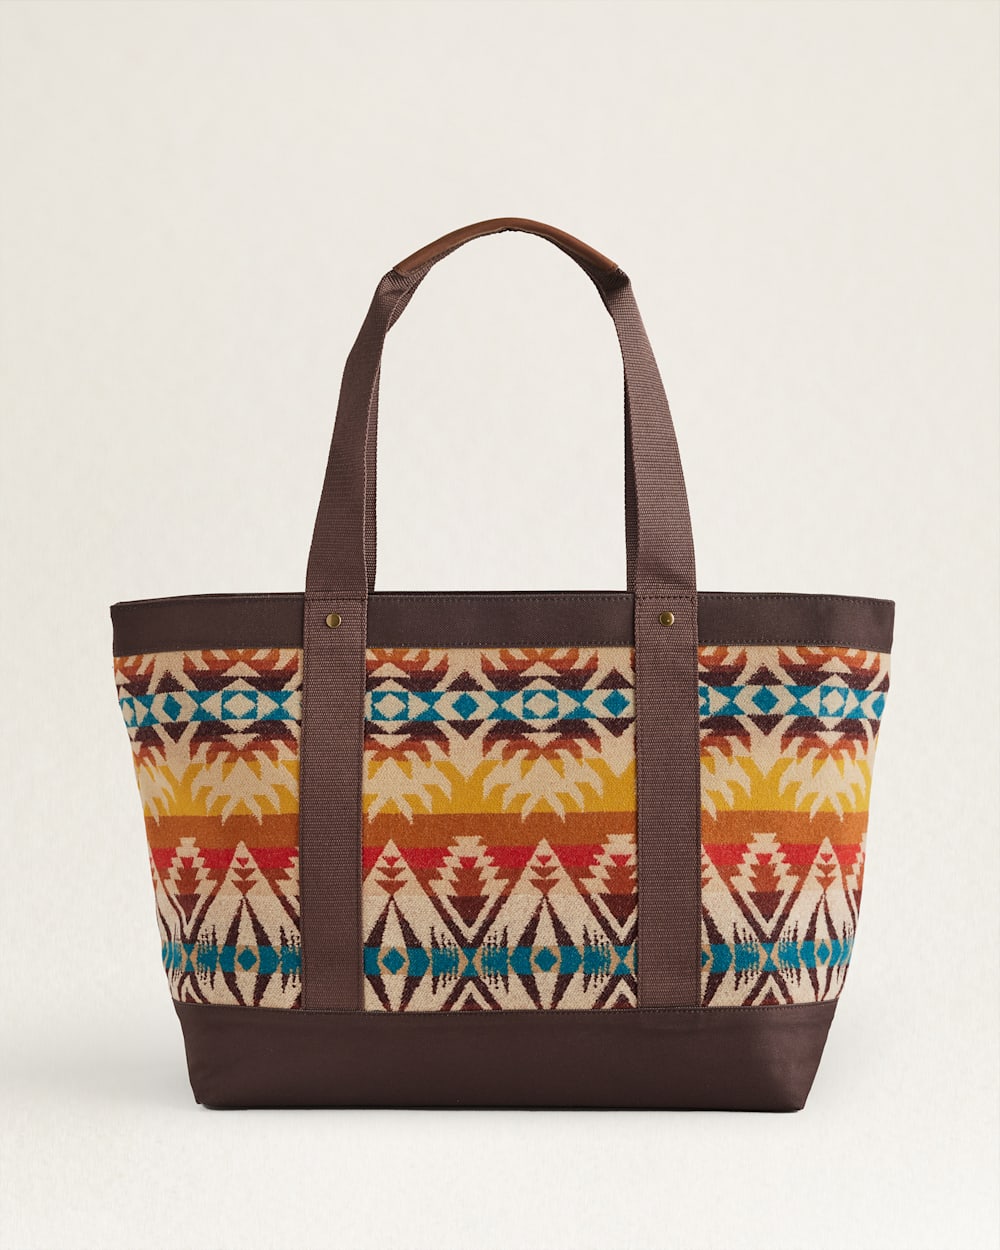 ALTERNATE VIEW OF PASCO ZIP TOTE IN SUNSET MULTI image number 3